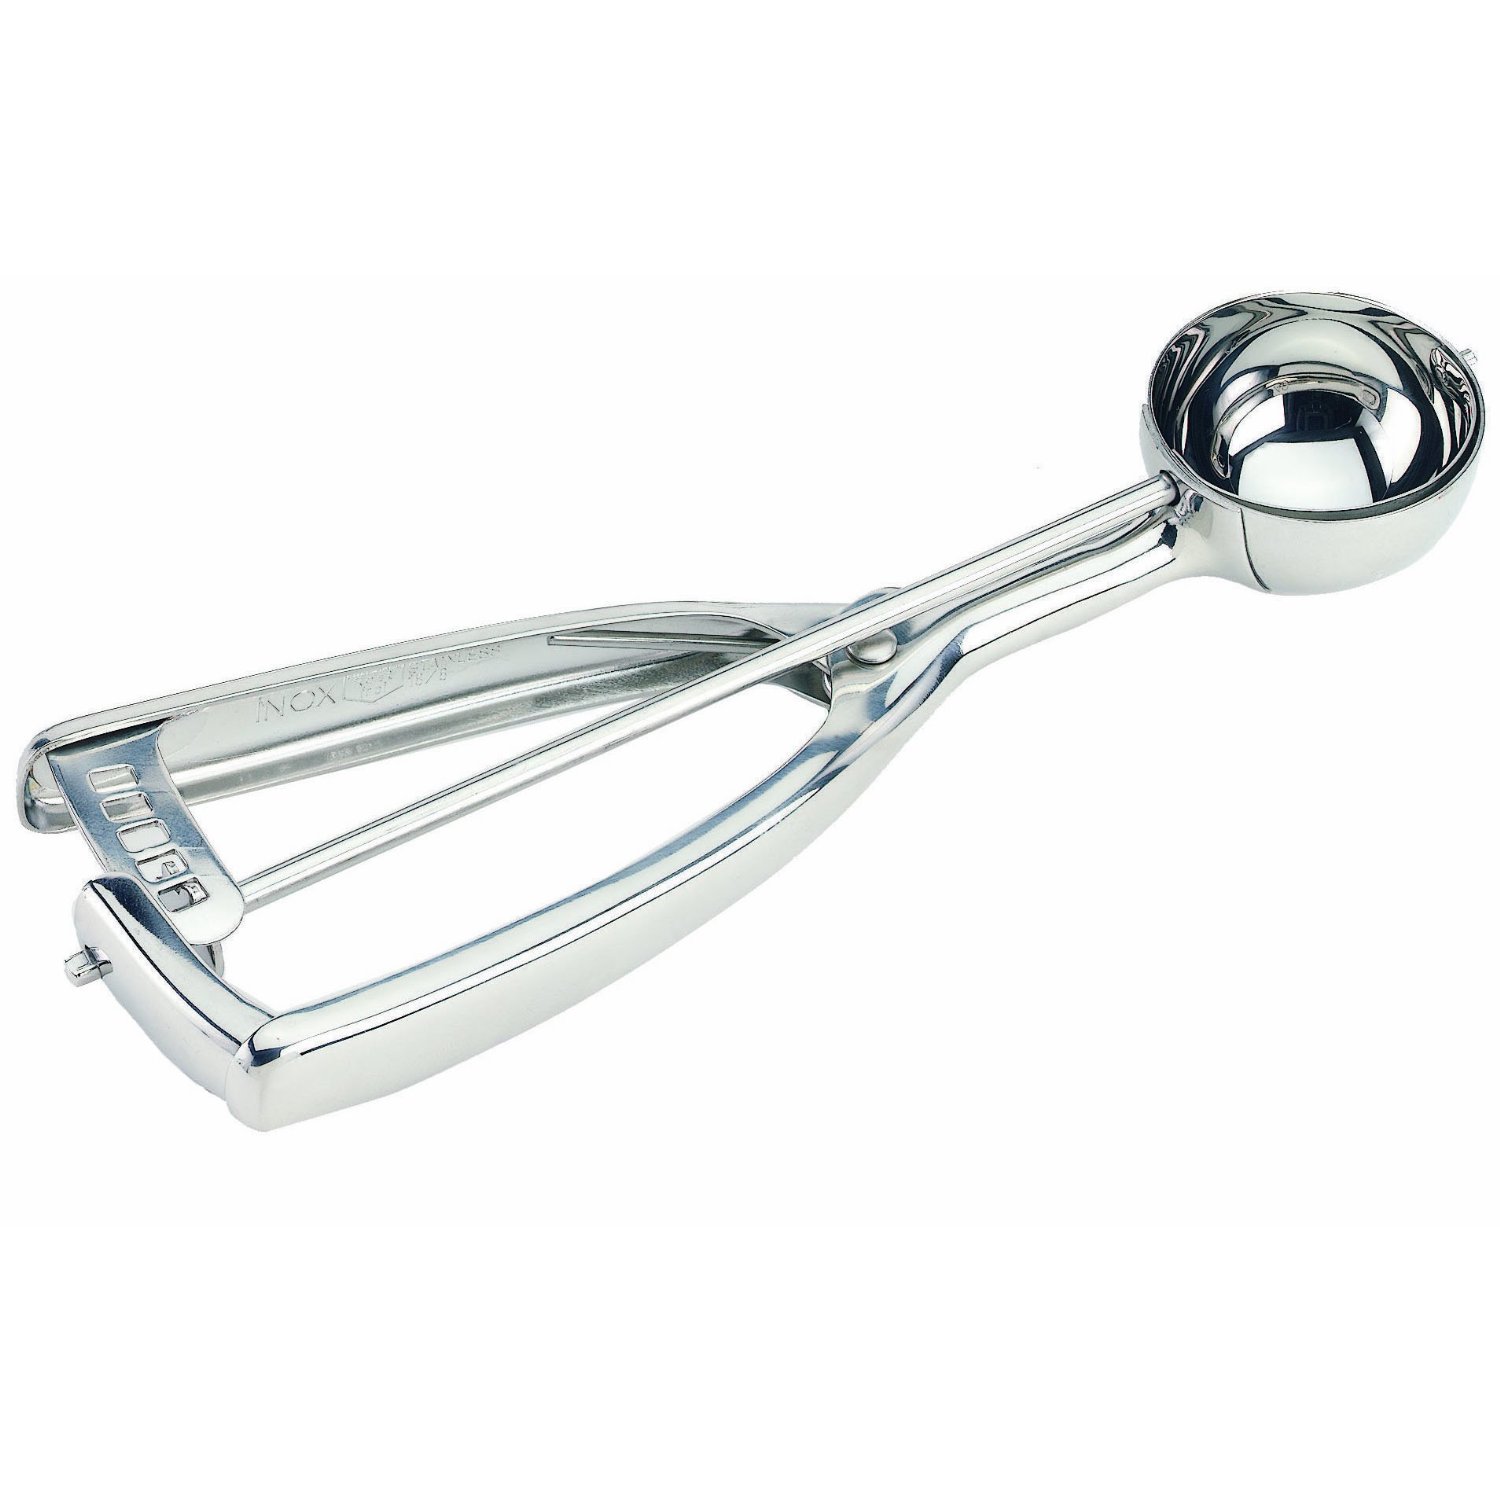 Dss40 Stainless Steel Portion Scoop - 0.9 Oz.